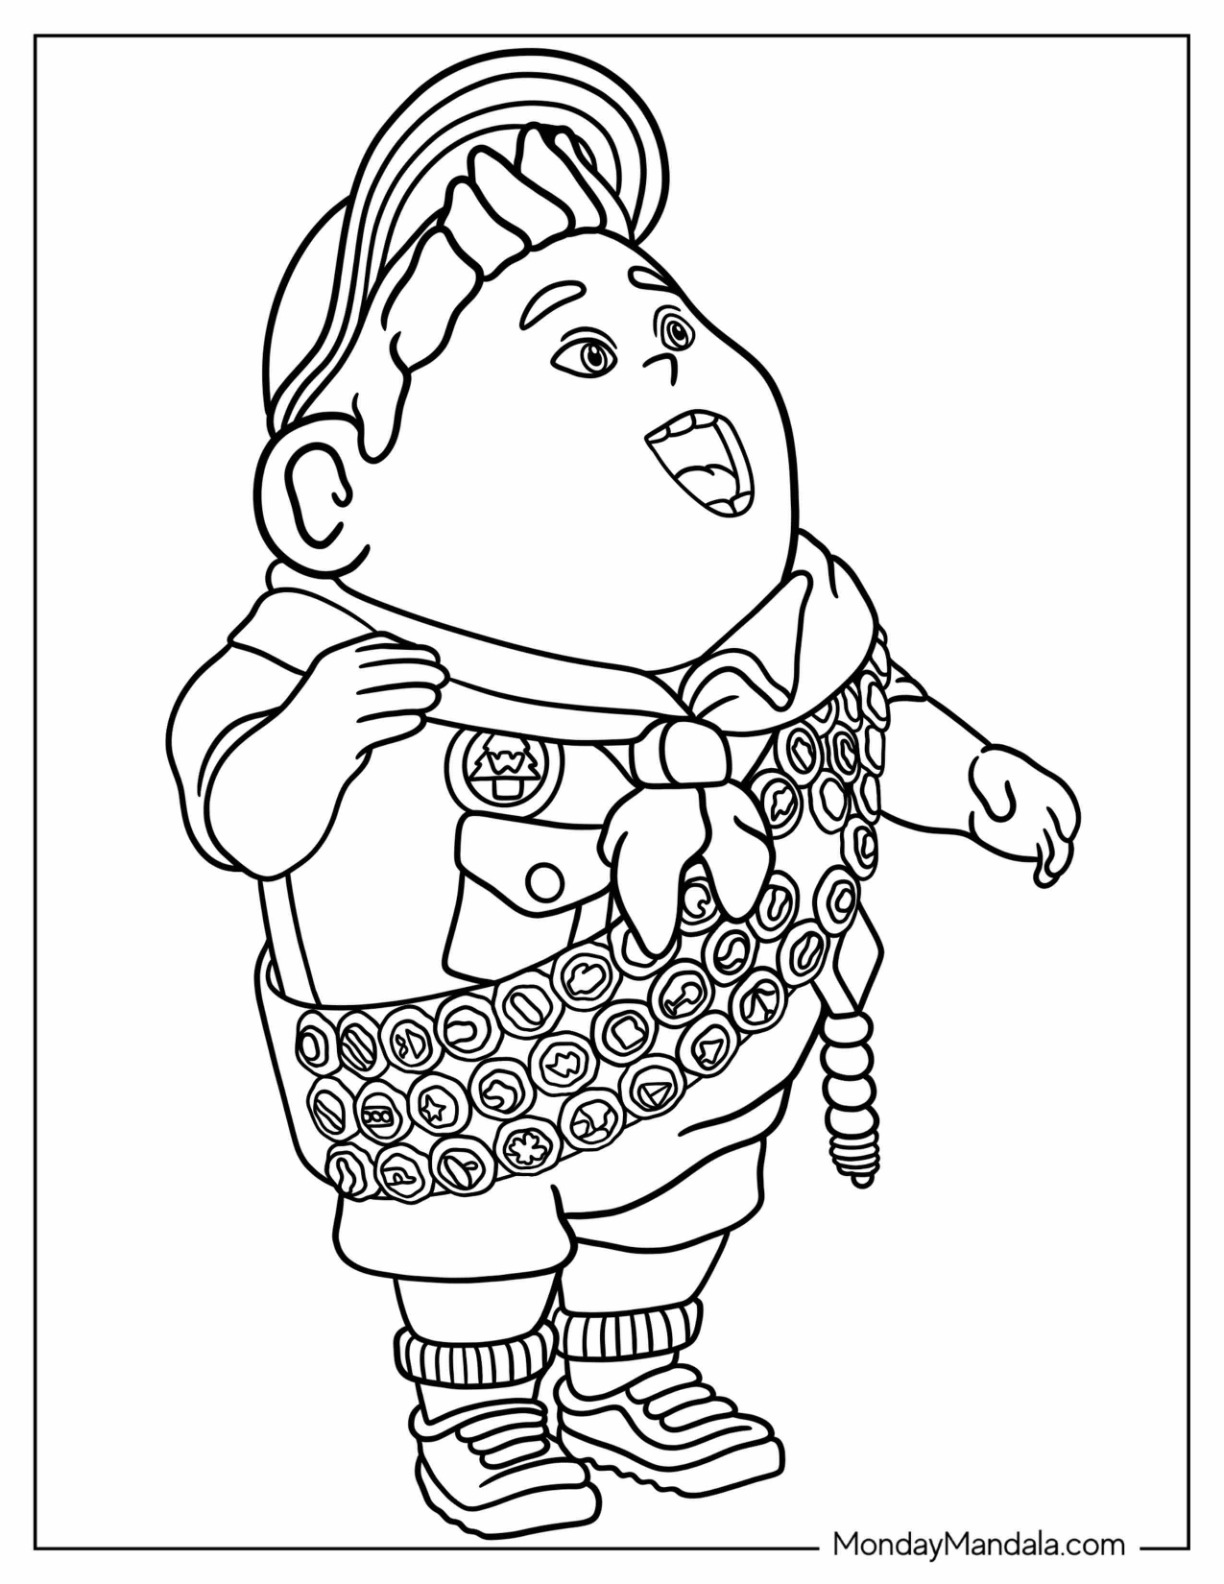 Up coloring pages free pdf printables